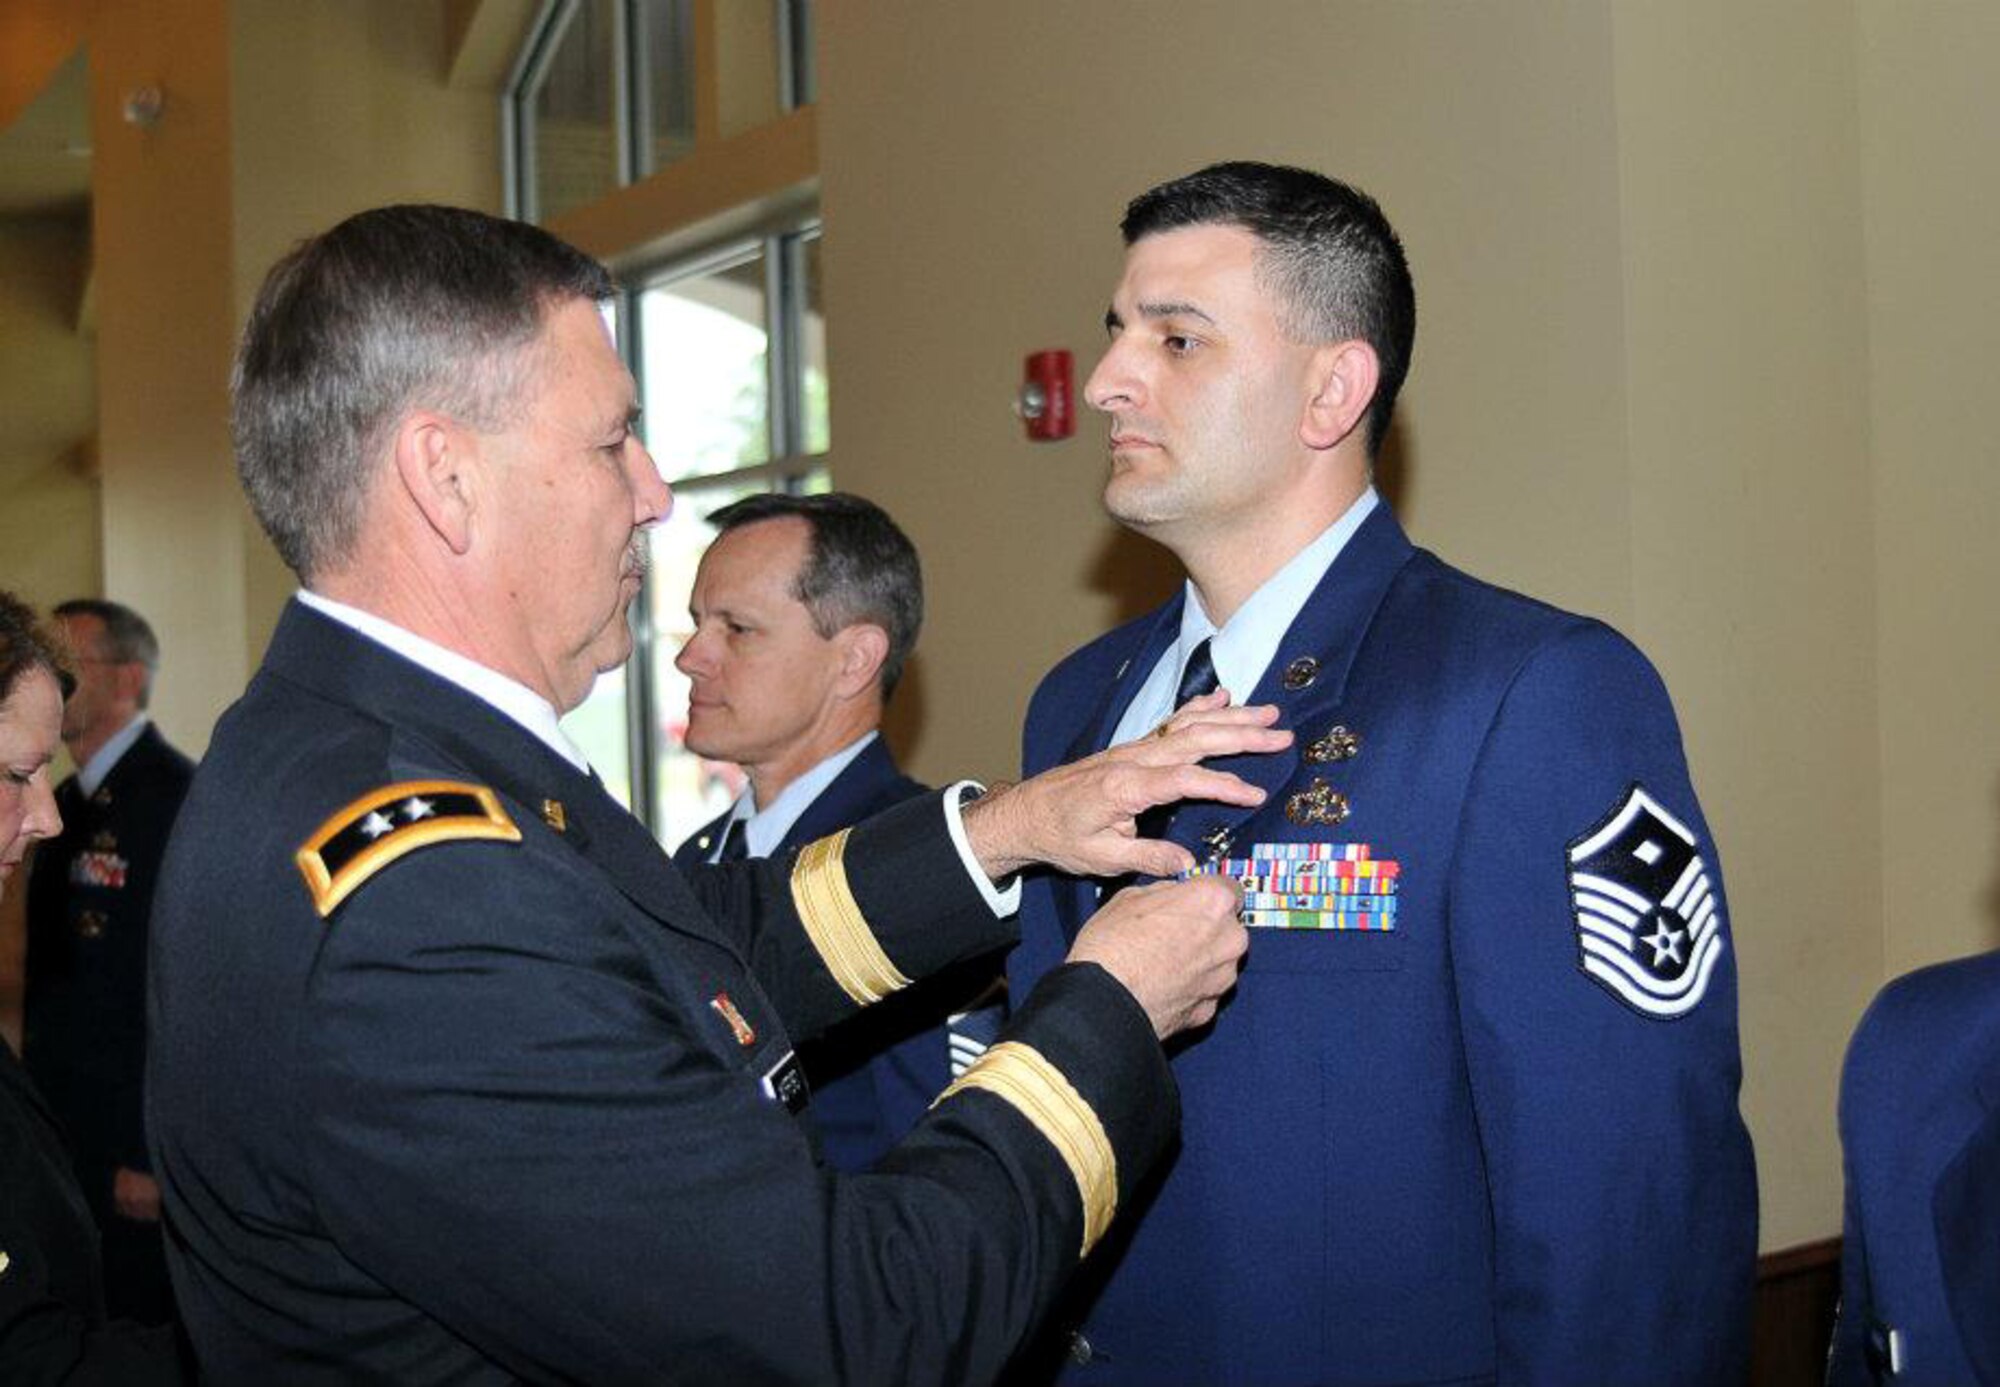 Master Sgt. Joshua Rich of the 188th Fighter Wing was named Arkansas Air National Guard First Sergeant of the Year. Maj. Gen. William Wofford, the adjutant general of the Arkansas National Guard, presents Rich with an Arkansas Distinguished Service Medal. (Photo by Arkansas National Guard Public Affairs)